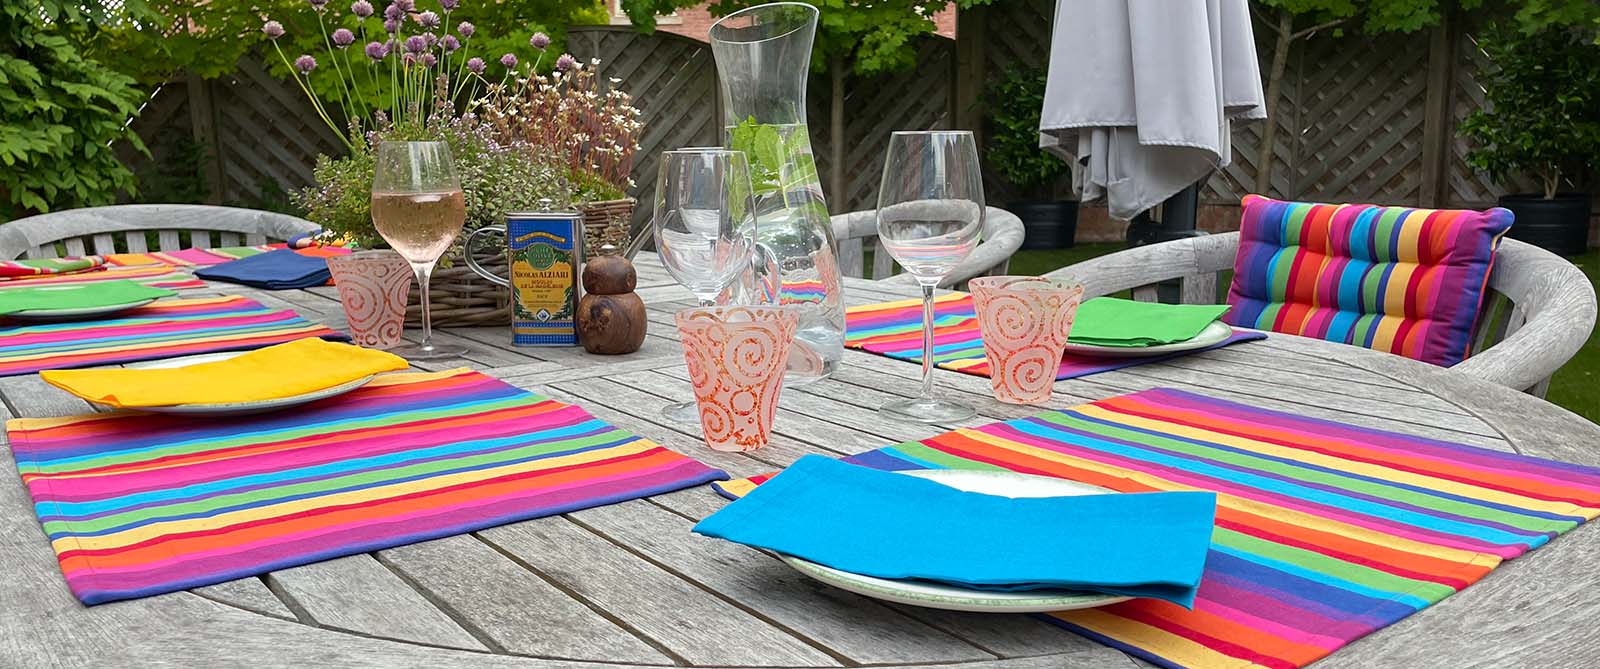 Turquoise, White, Black Striped Place Mats - Colourful Table Mats set of 4